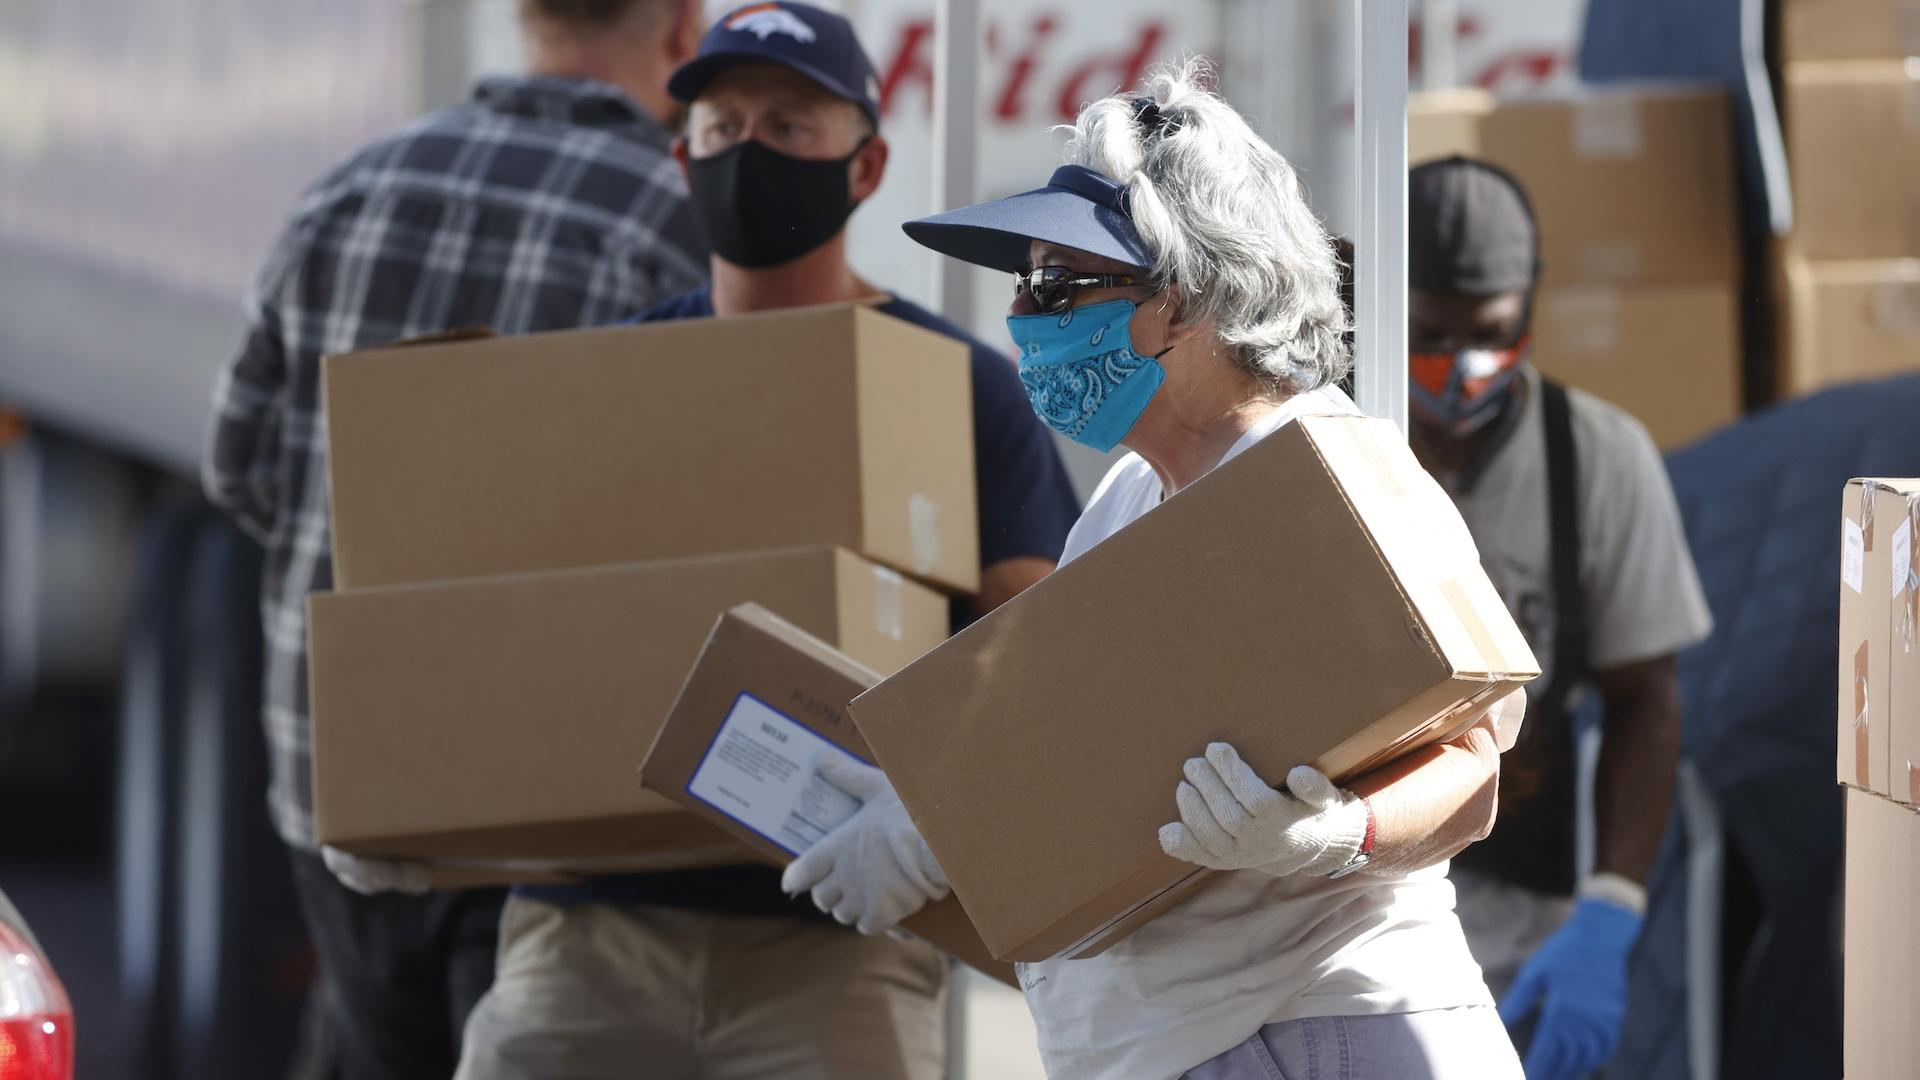 In this June 26, 2020, file photo, volunteers Juanita MacKenzie, front, and Dave Stutman carry boxes of food to a waiting car at a large mobile pantry set up by the Food Bank of the Rockies in the parking lot of Empower Field at Mile High in west Denver. (AP Photo/David Zalubowski, File)